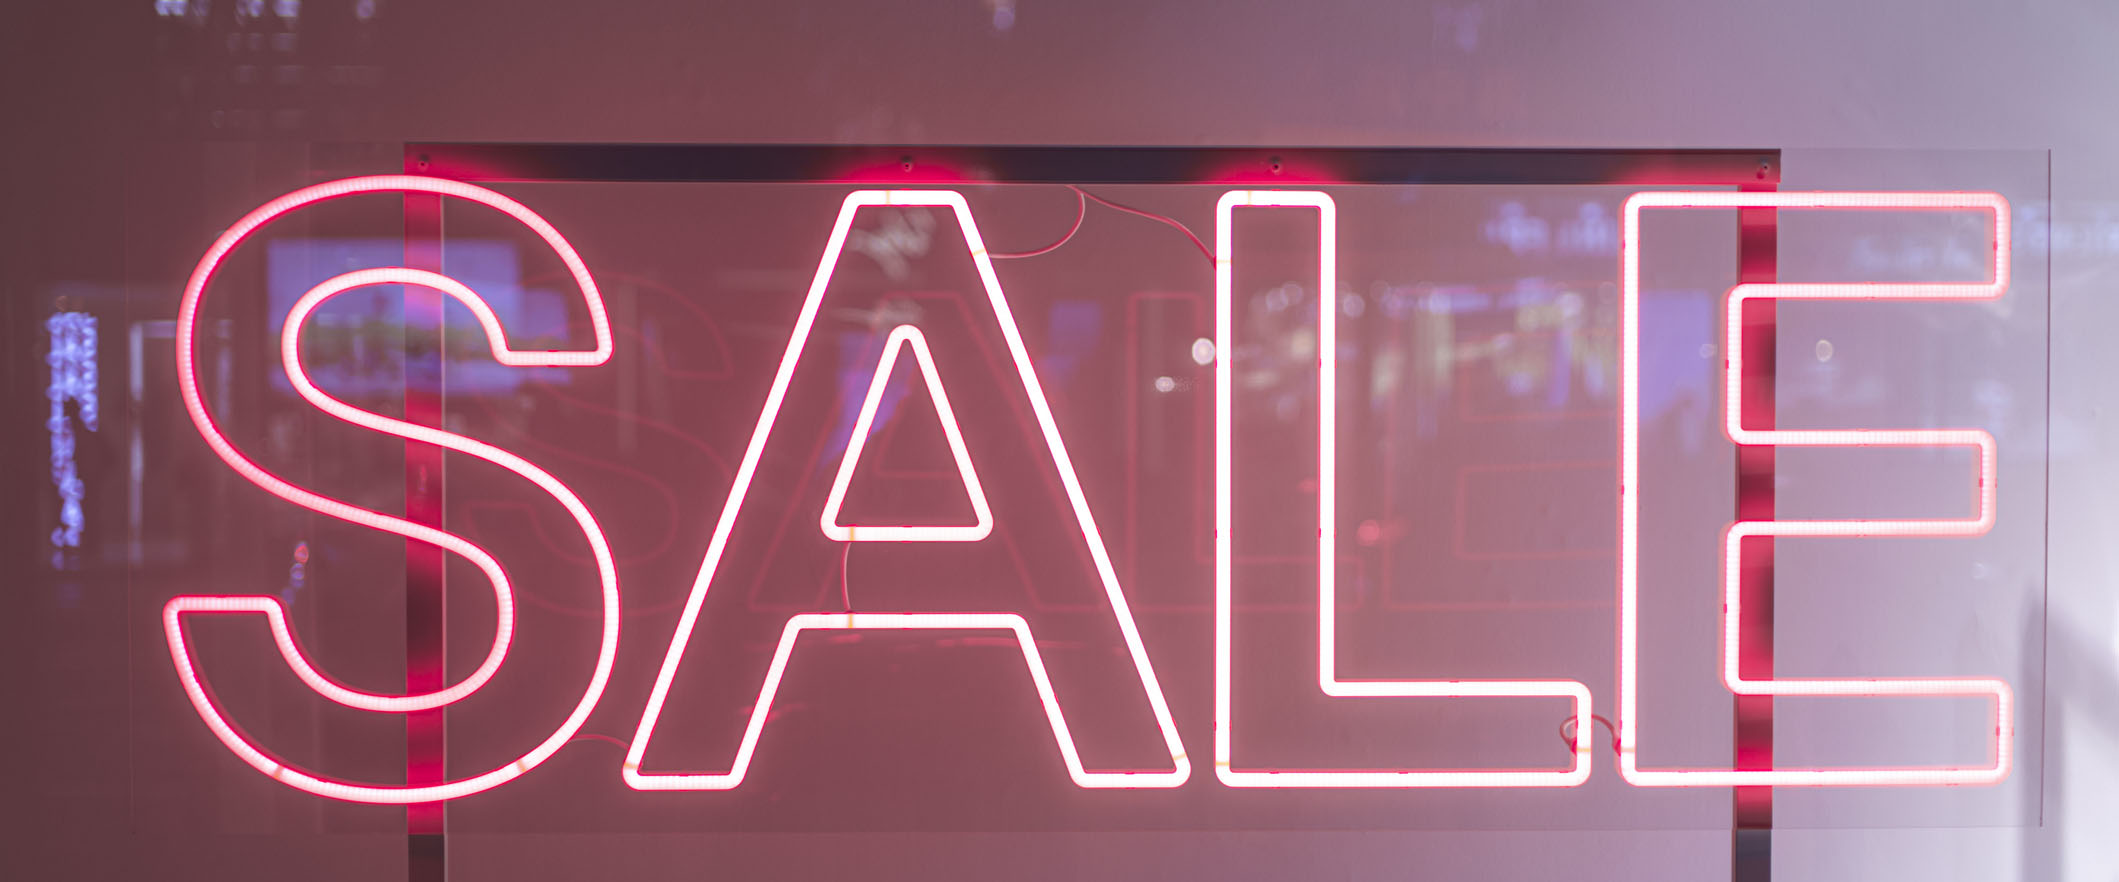 Neon pink sign that says "sale" in capital letters.